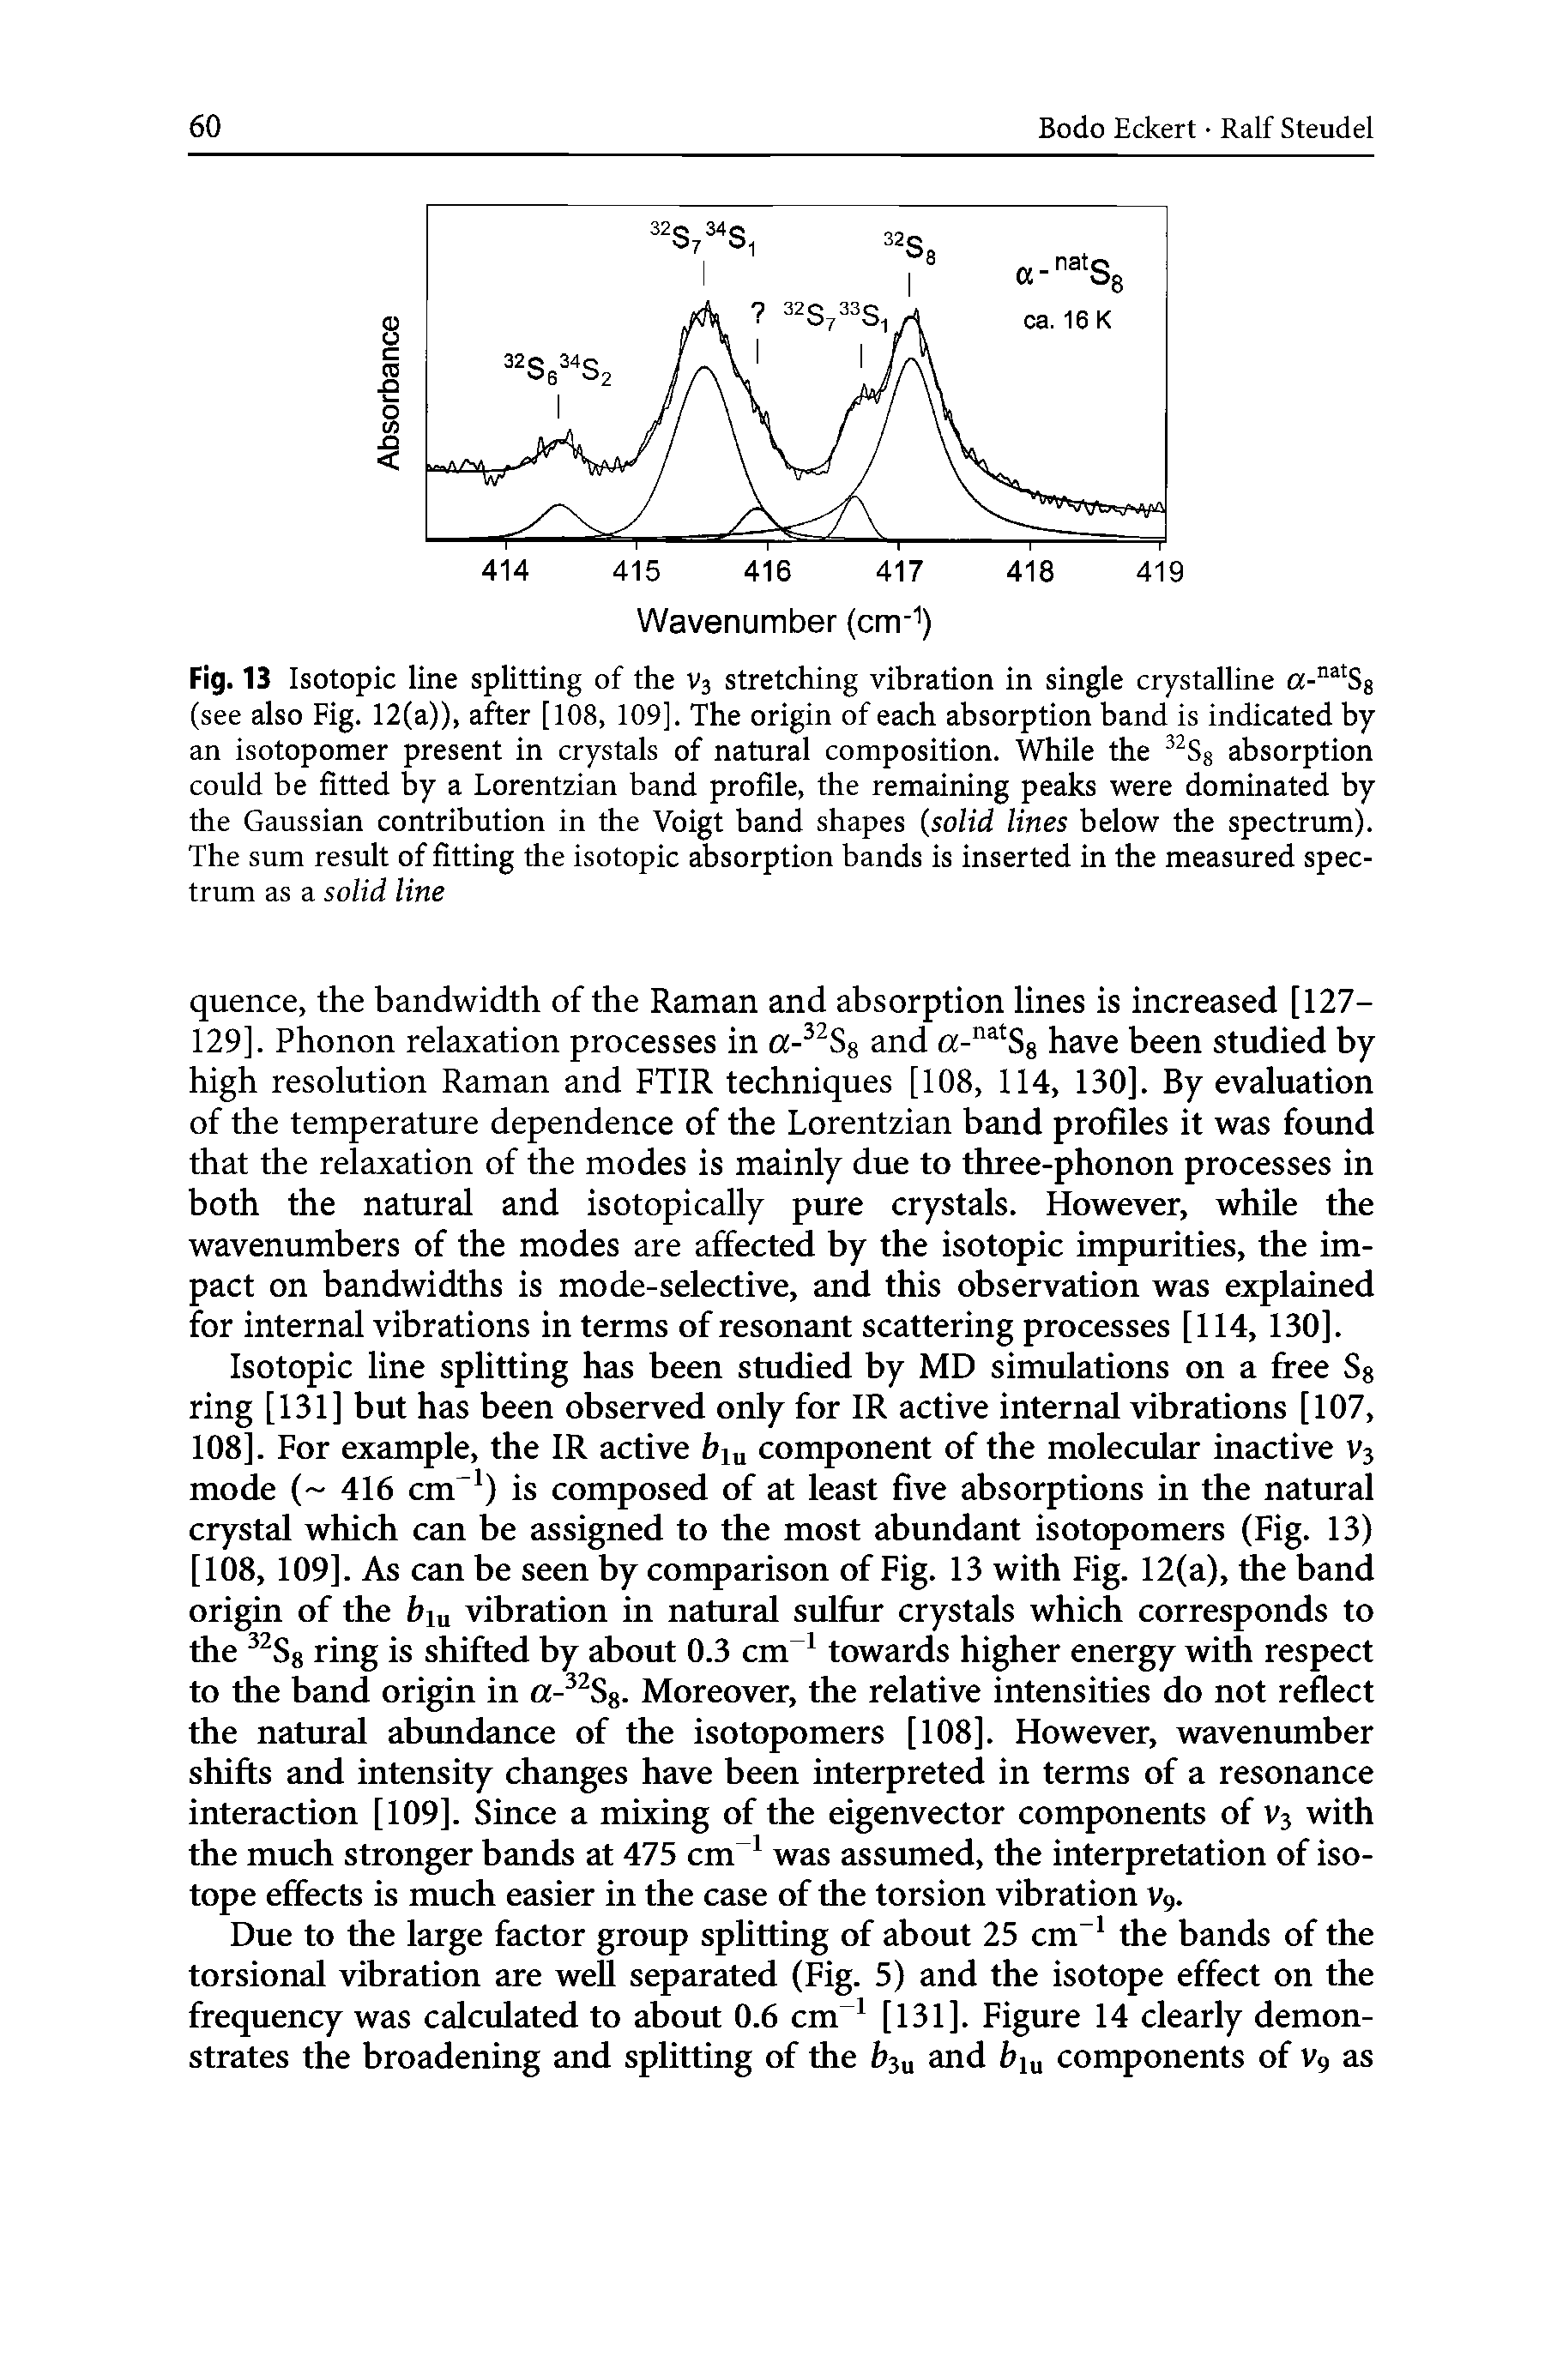 Fig. 13 Isotopic line splitting of the V3 stretching vibration in single crystalline (see also Fig. 12(a)), after [108, 109], The origin of each absorption band is indicated by an isotopomer present in crystals of natural composition. While the absorption could be fitted by a Lorentzian band profile, the remaining peaks were dominated by the Gaussian contribution in the Voigt band shapes (solid lines below the spectrum). The sum result of fitting the isotopic absorption bands is inserted in the measured spectrum as a solid line...